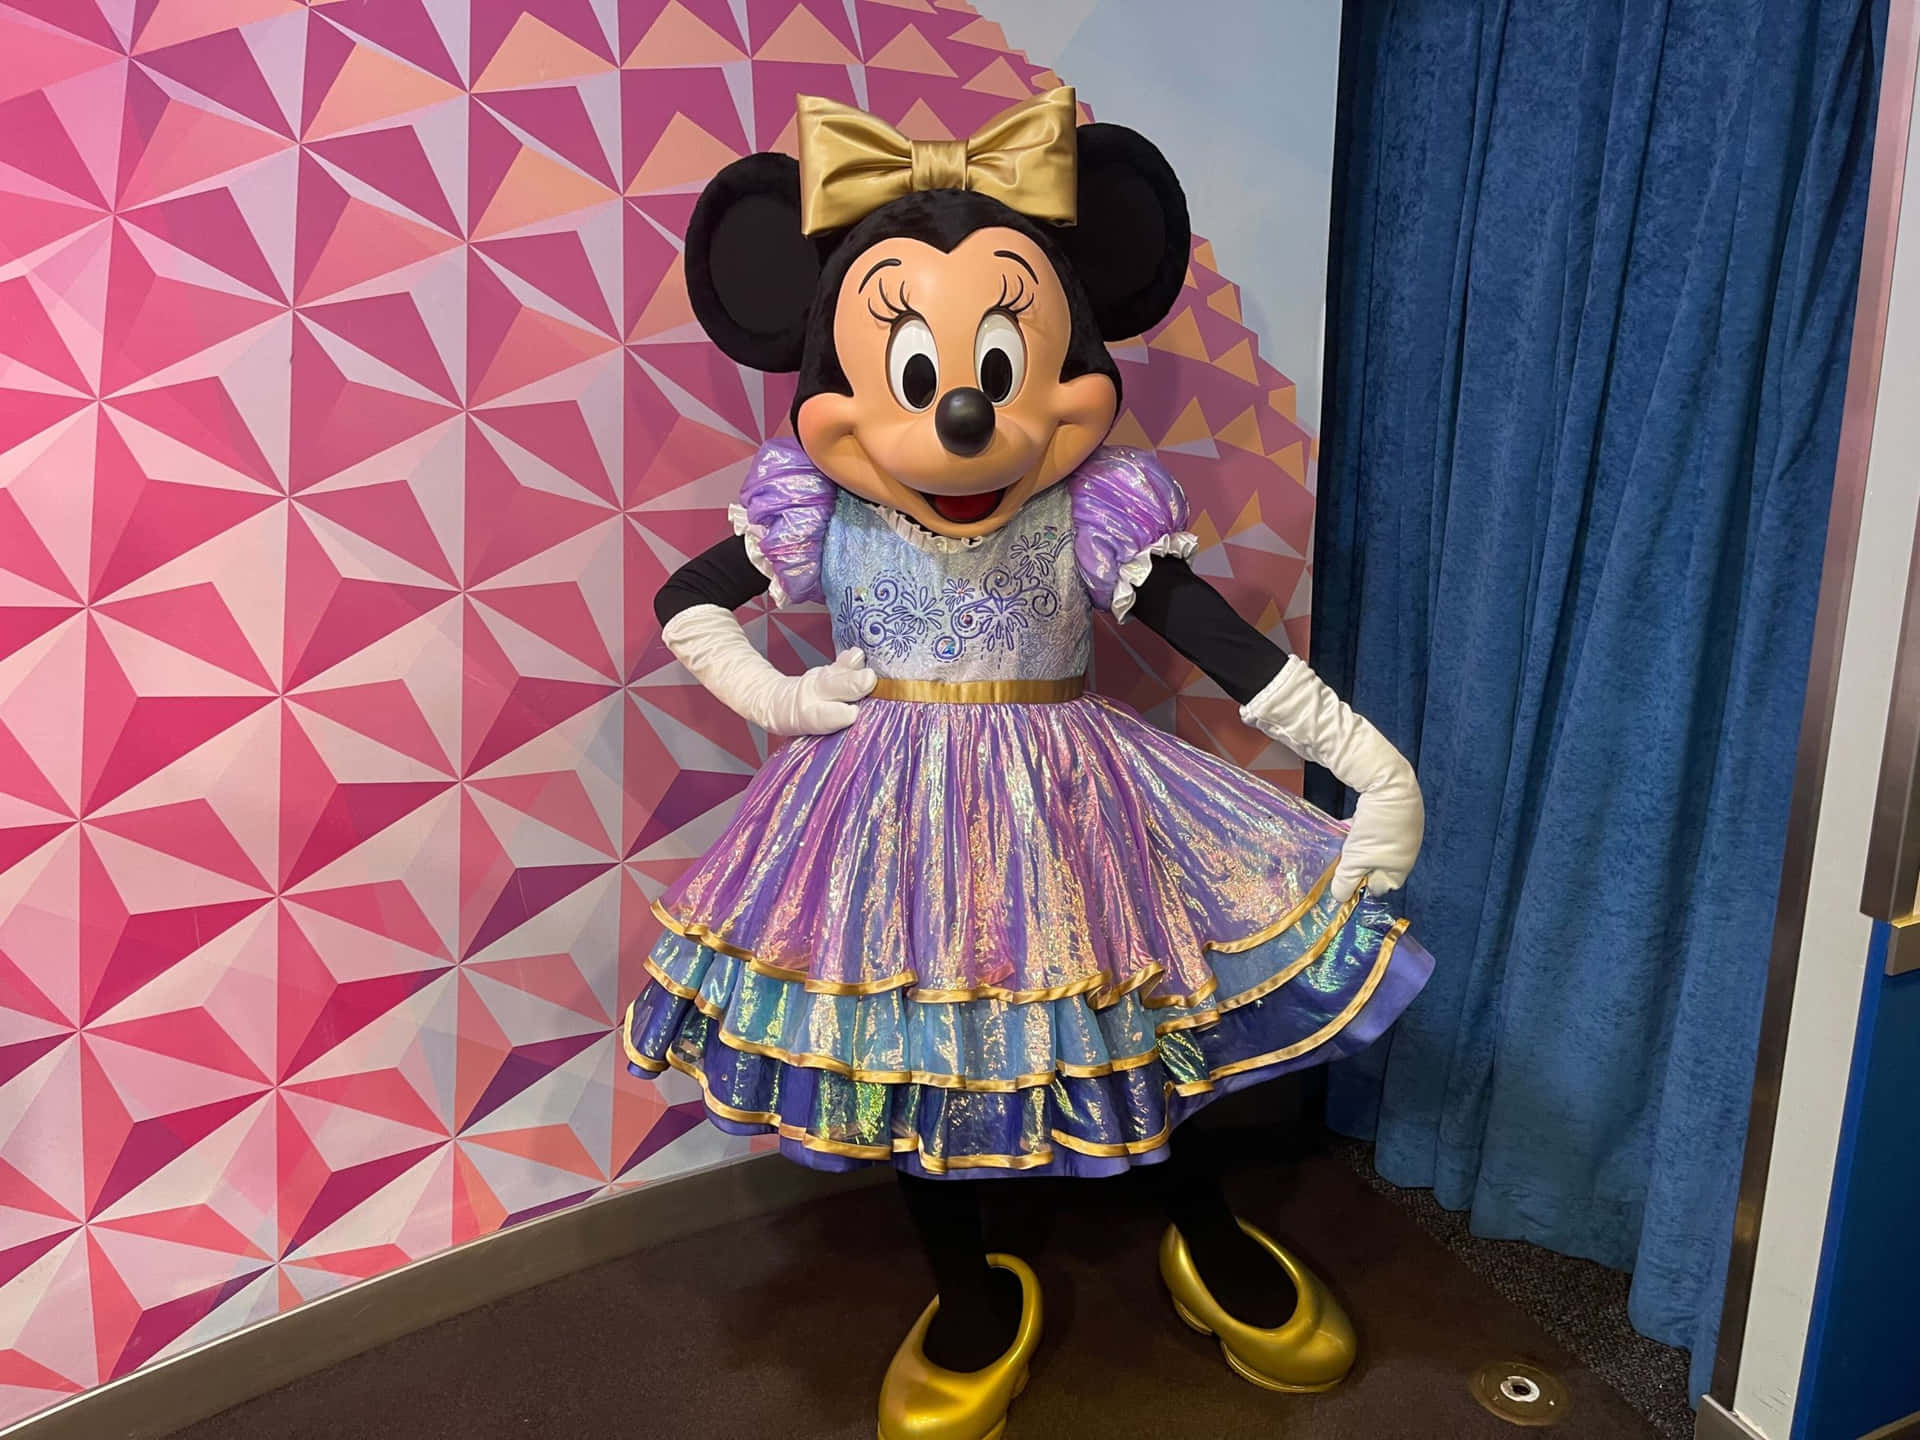 "Minnie Mouse looking adorable with bow".